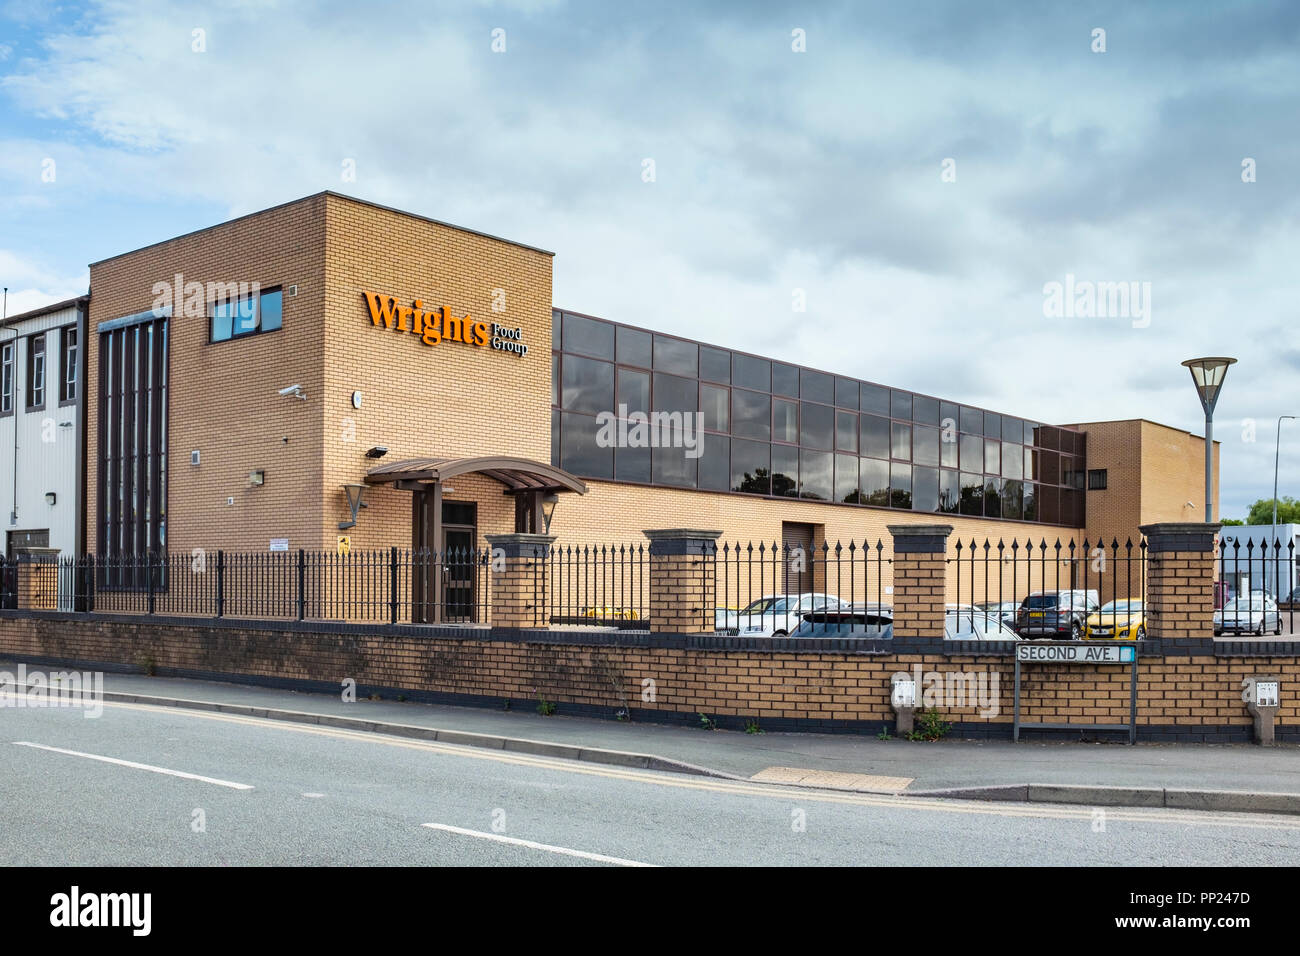 Wrights food group in Crewe Cheshire UK Stock Photo